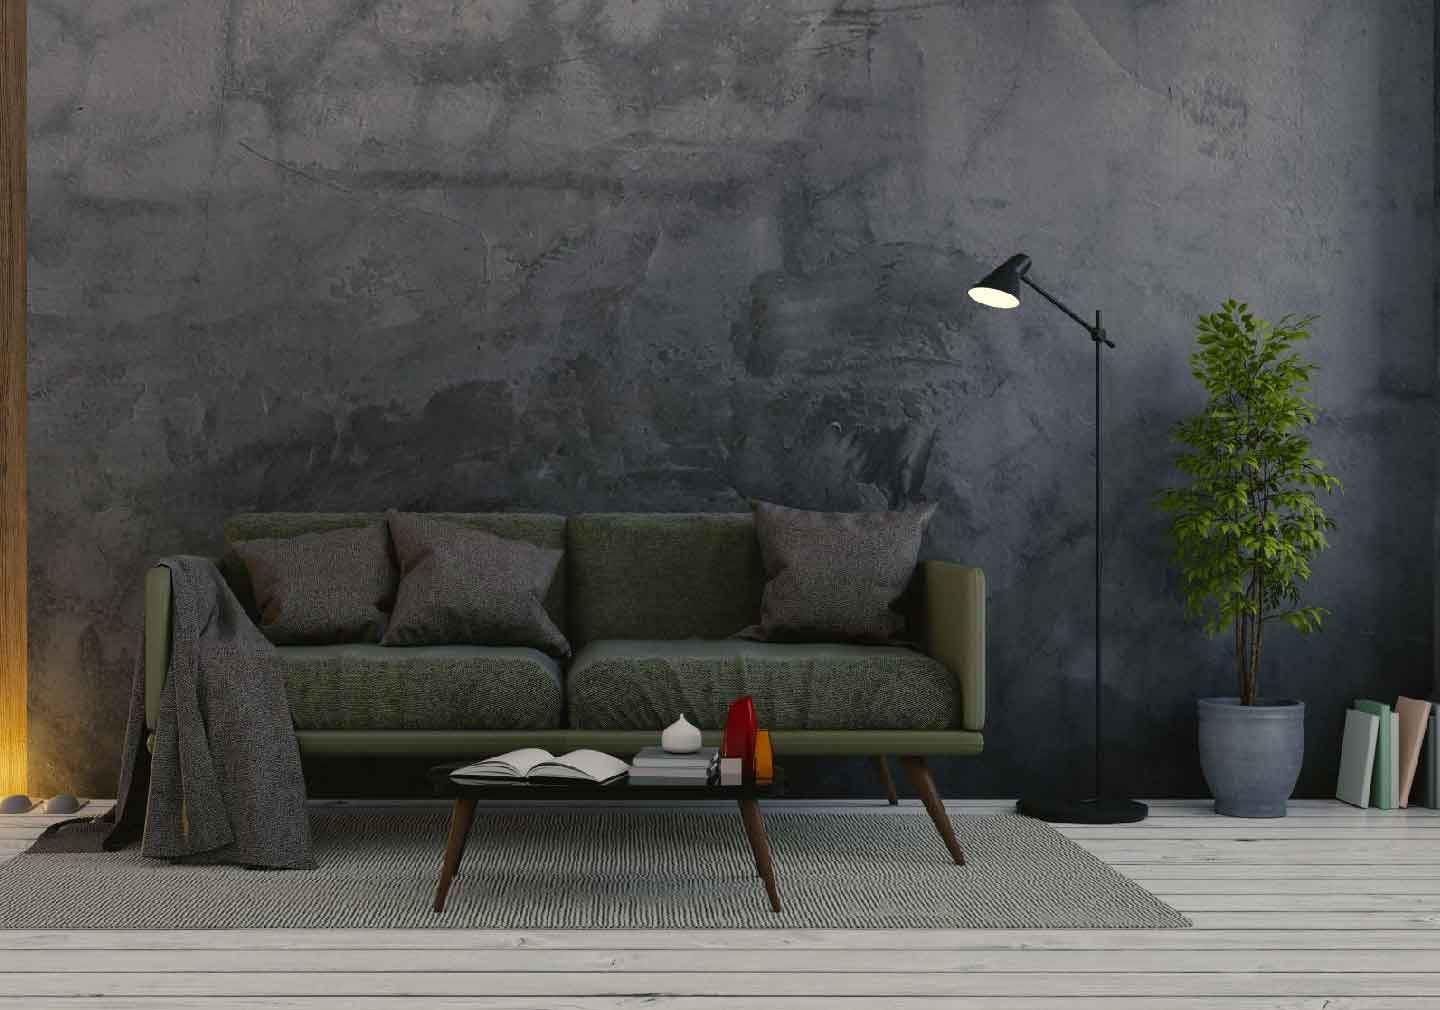 living room interior design with dark color sofa and dark wallpaper at the base wall 